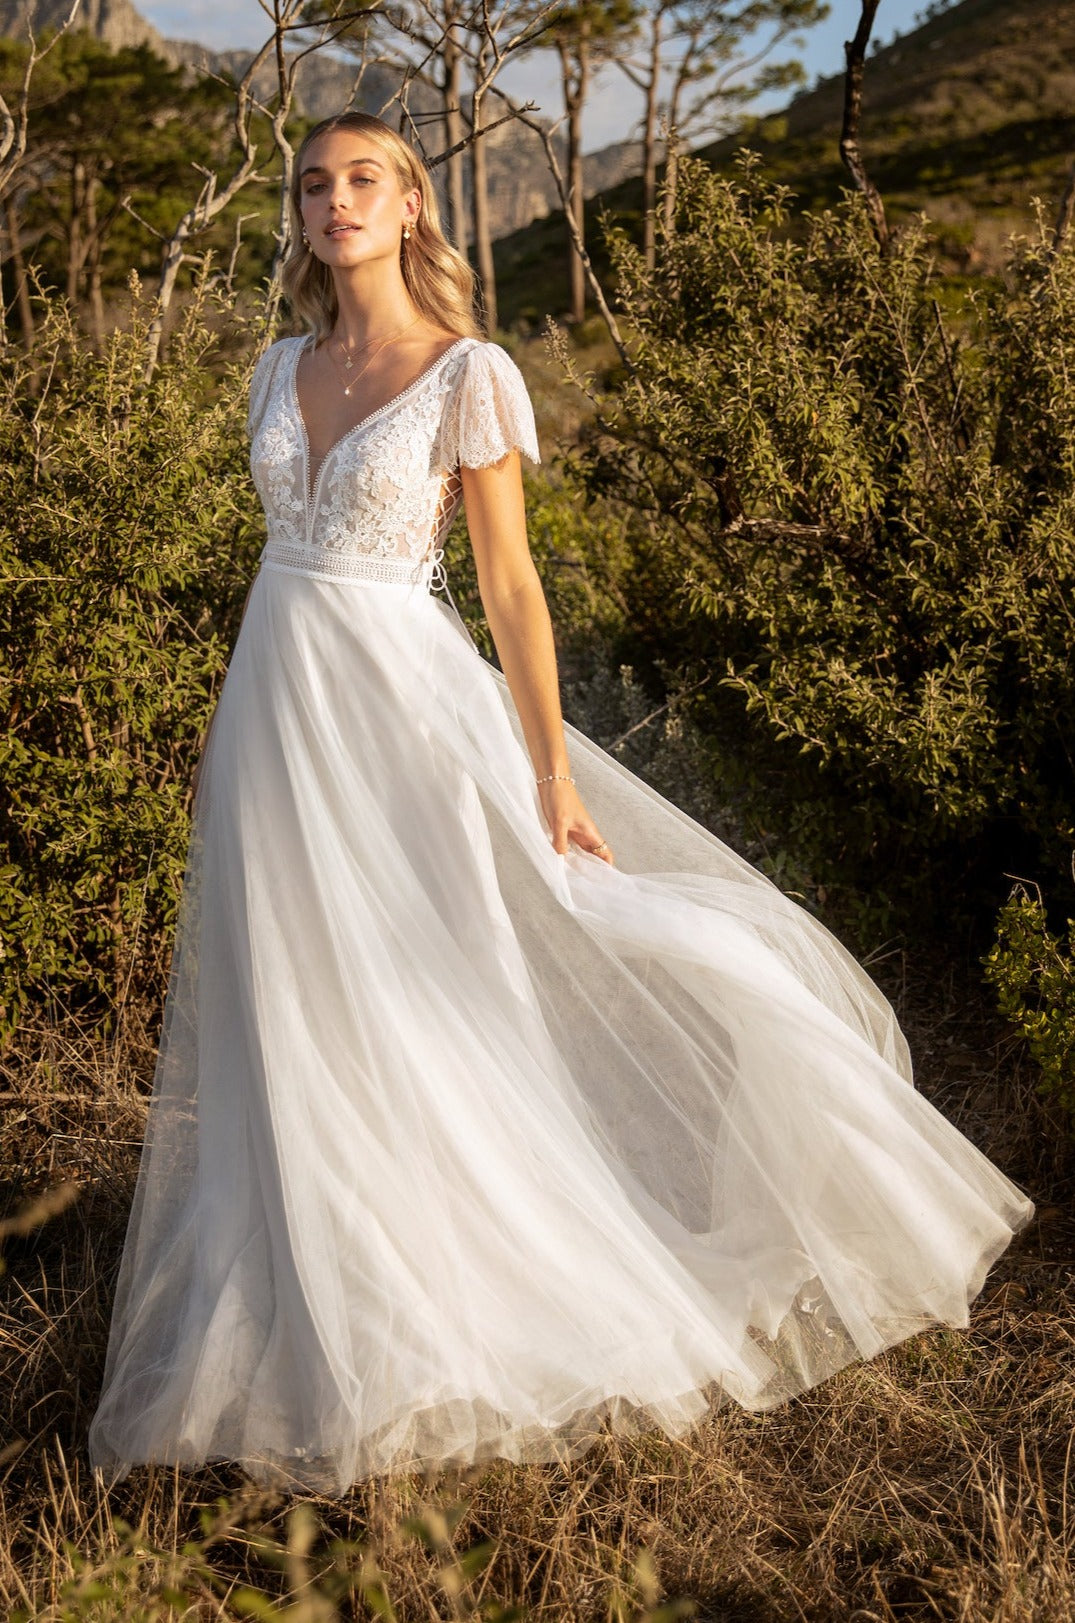 Boho wedding dress in lace and tulle with lace up detail. – Kelsey Rose